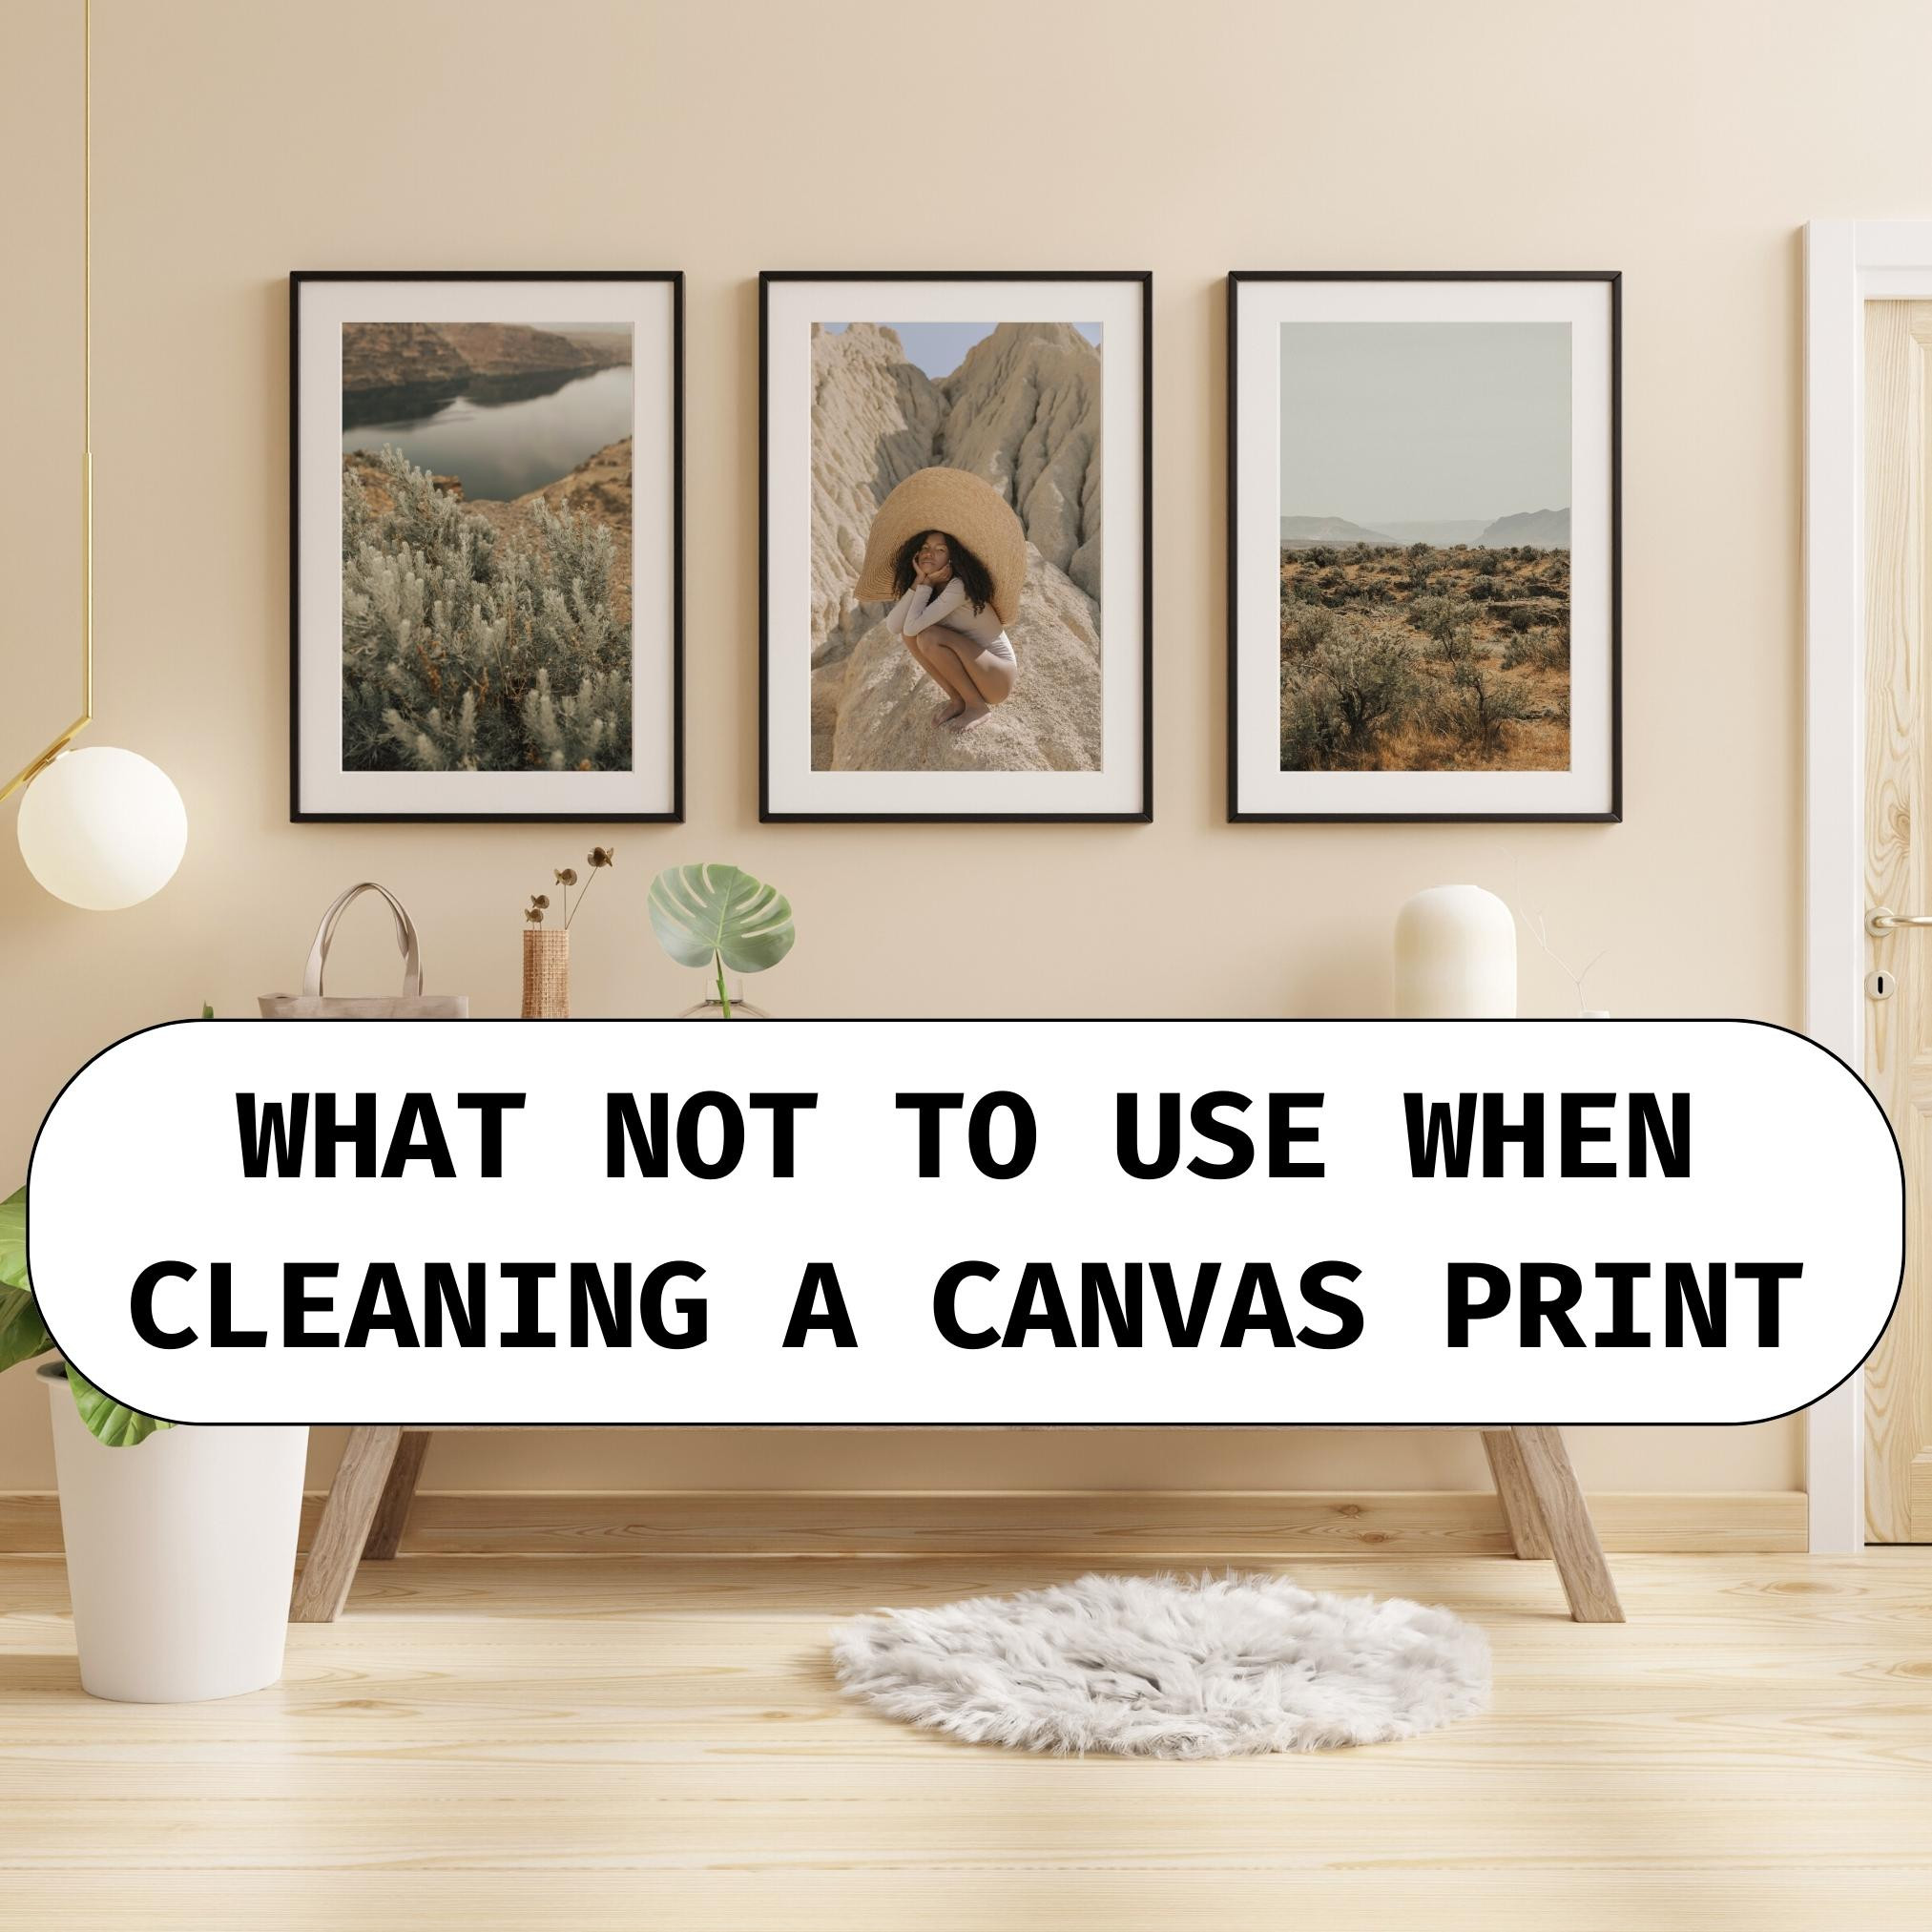 What Not to Use When Cleaning a Canvas Print